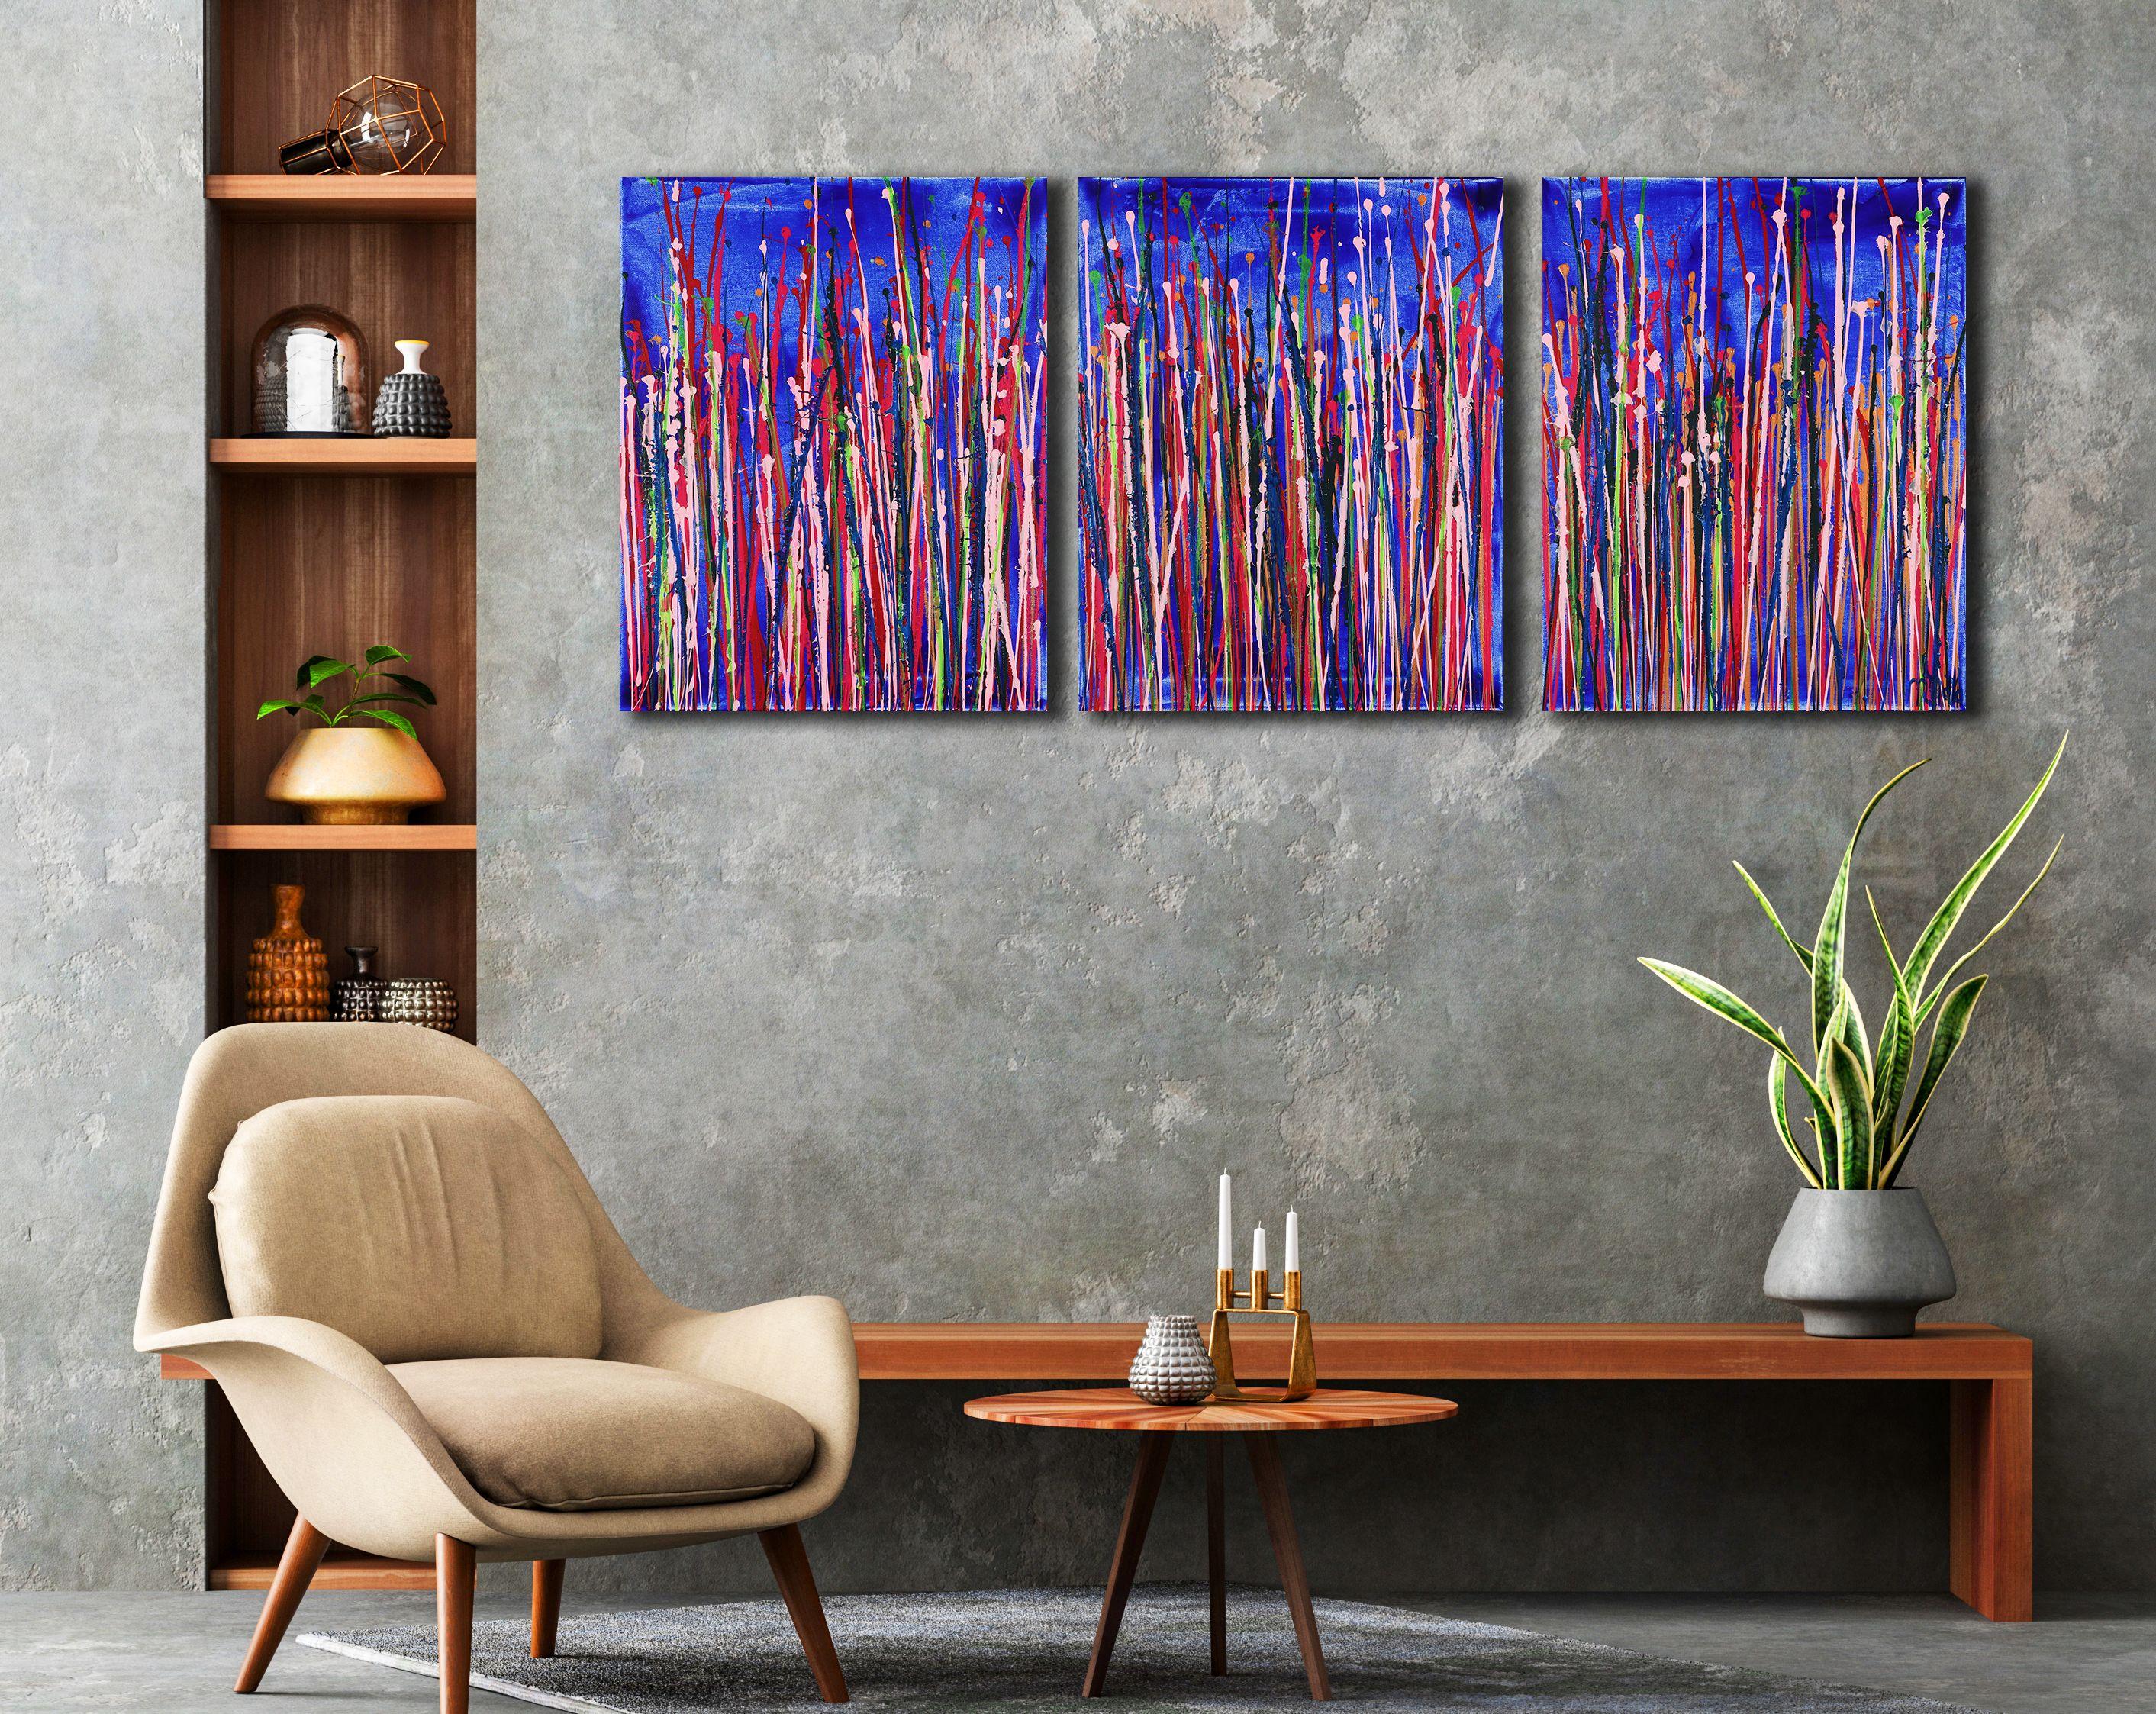 Painting: Acrylic on Canvas.    Three canvases16 W x 20 H x 0.7 in each.    Expressive modern abstract, bold full of life, gloss and shimmer! inspired by nature, many colors combined with mica particles. Green, blue, magenta, purple, pink and clear